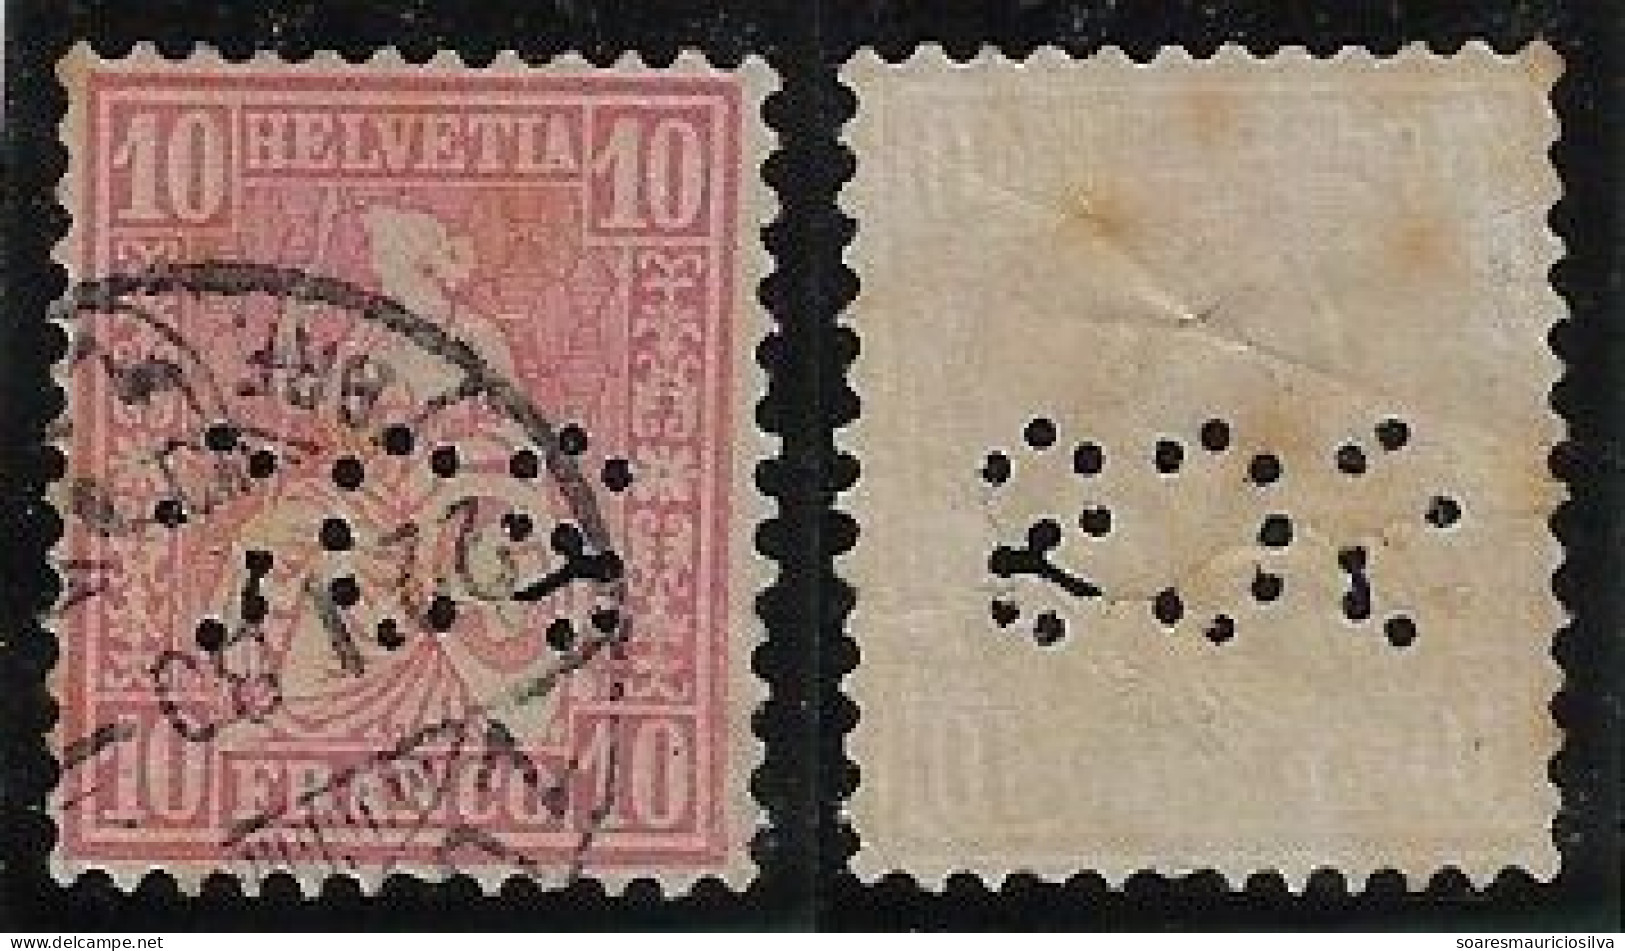 Switzerland 1874/1893 Stamp Perfin SCS By Société Crédit Suisse Swiss Credit Company From Zuriche Lochung Perfore - Perforés